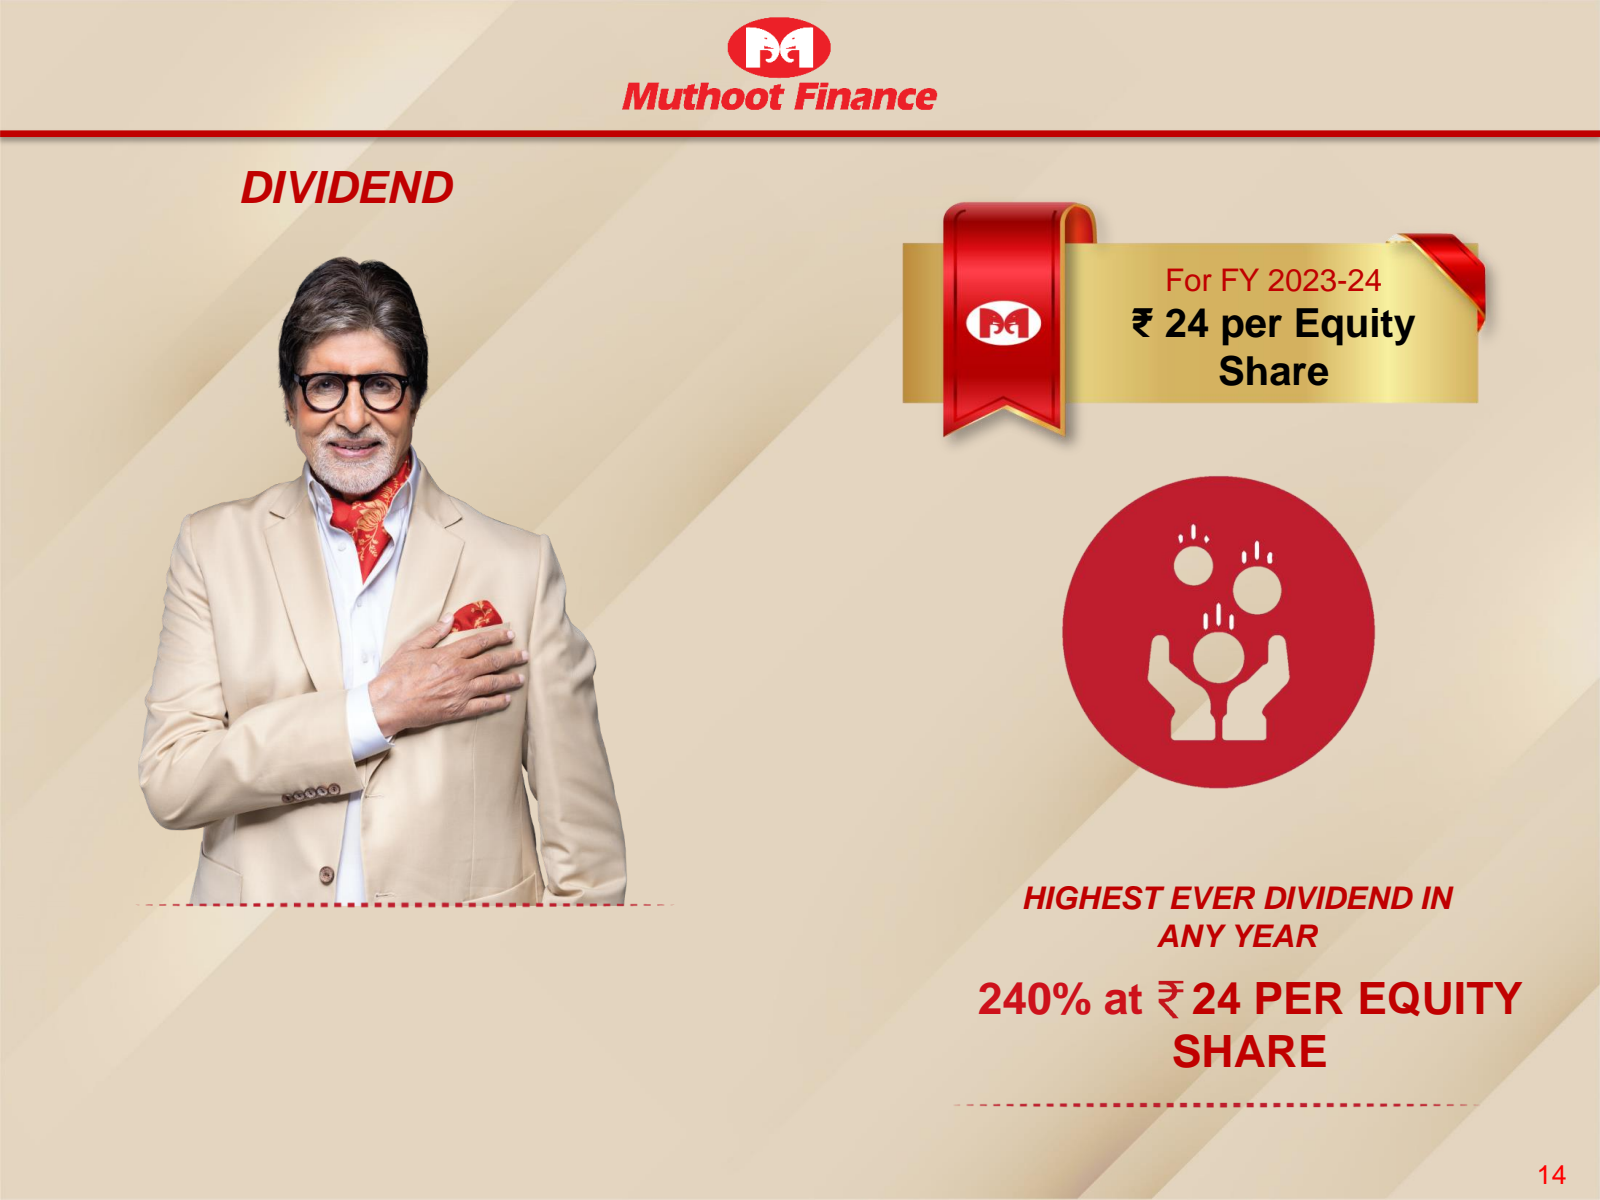 DIVIDEND 

Muthoot F